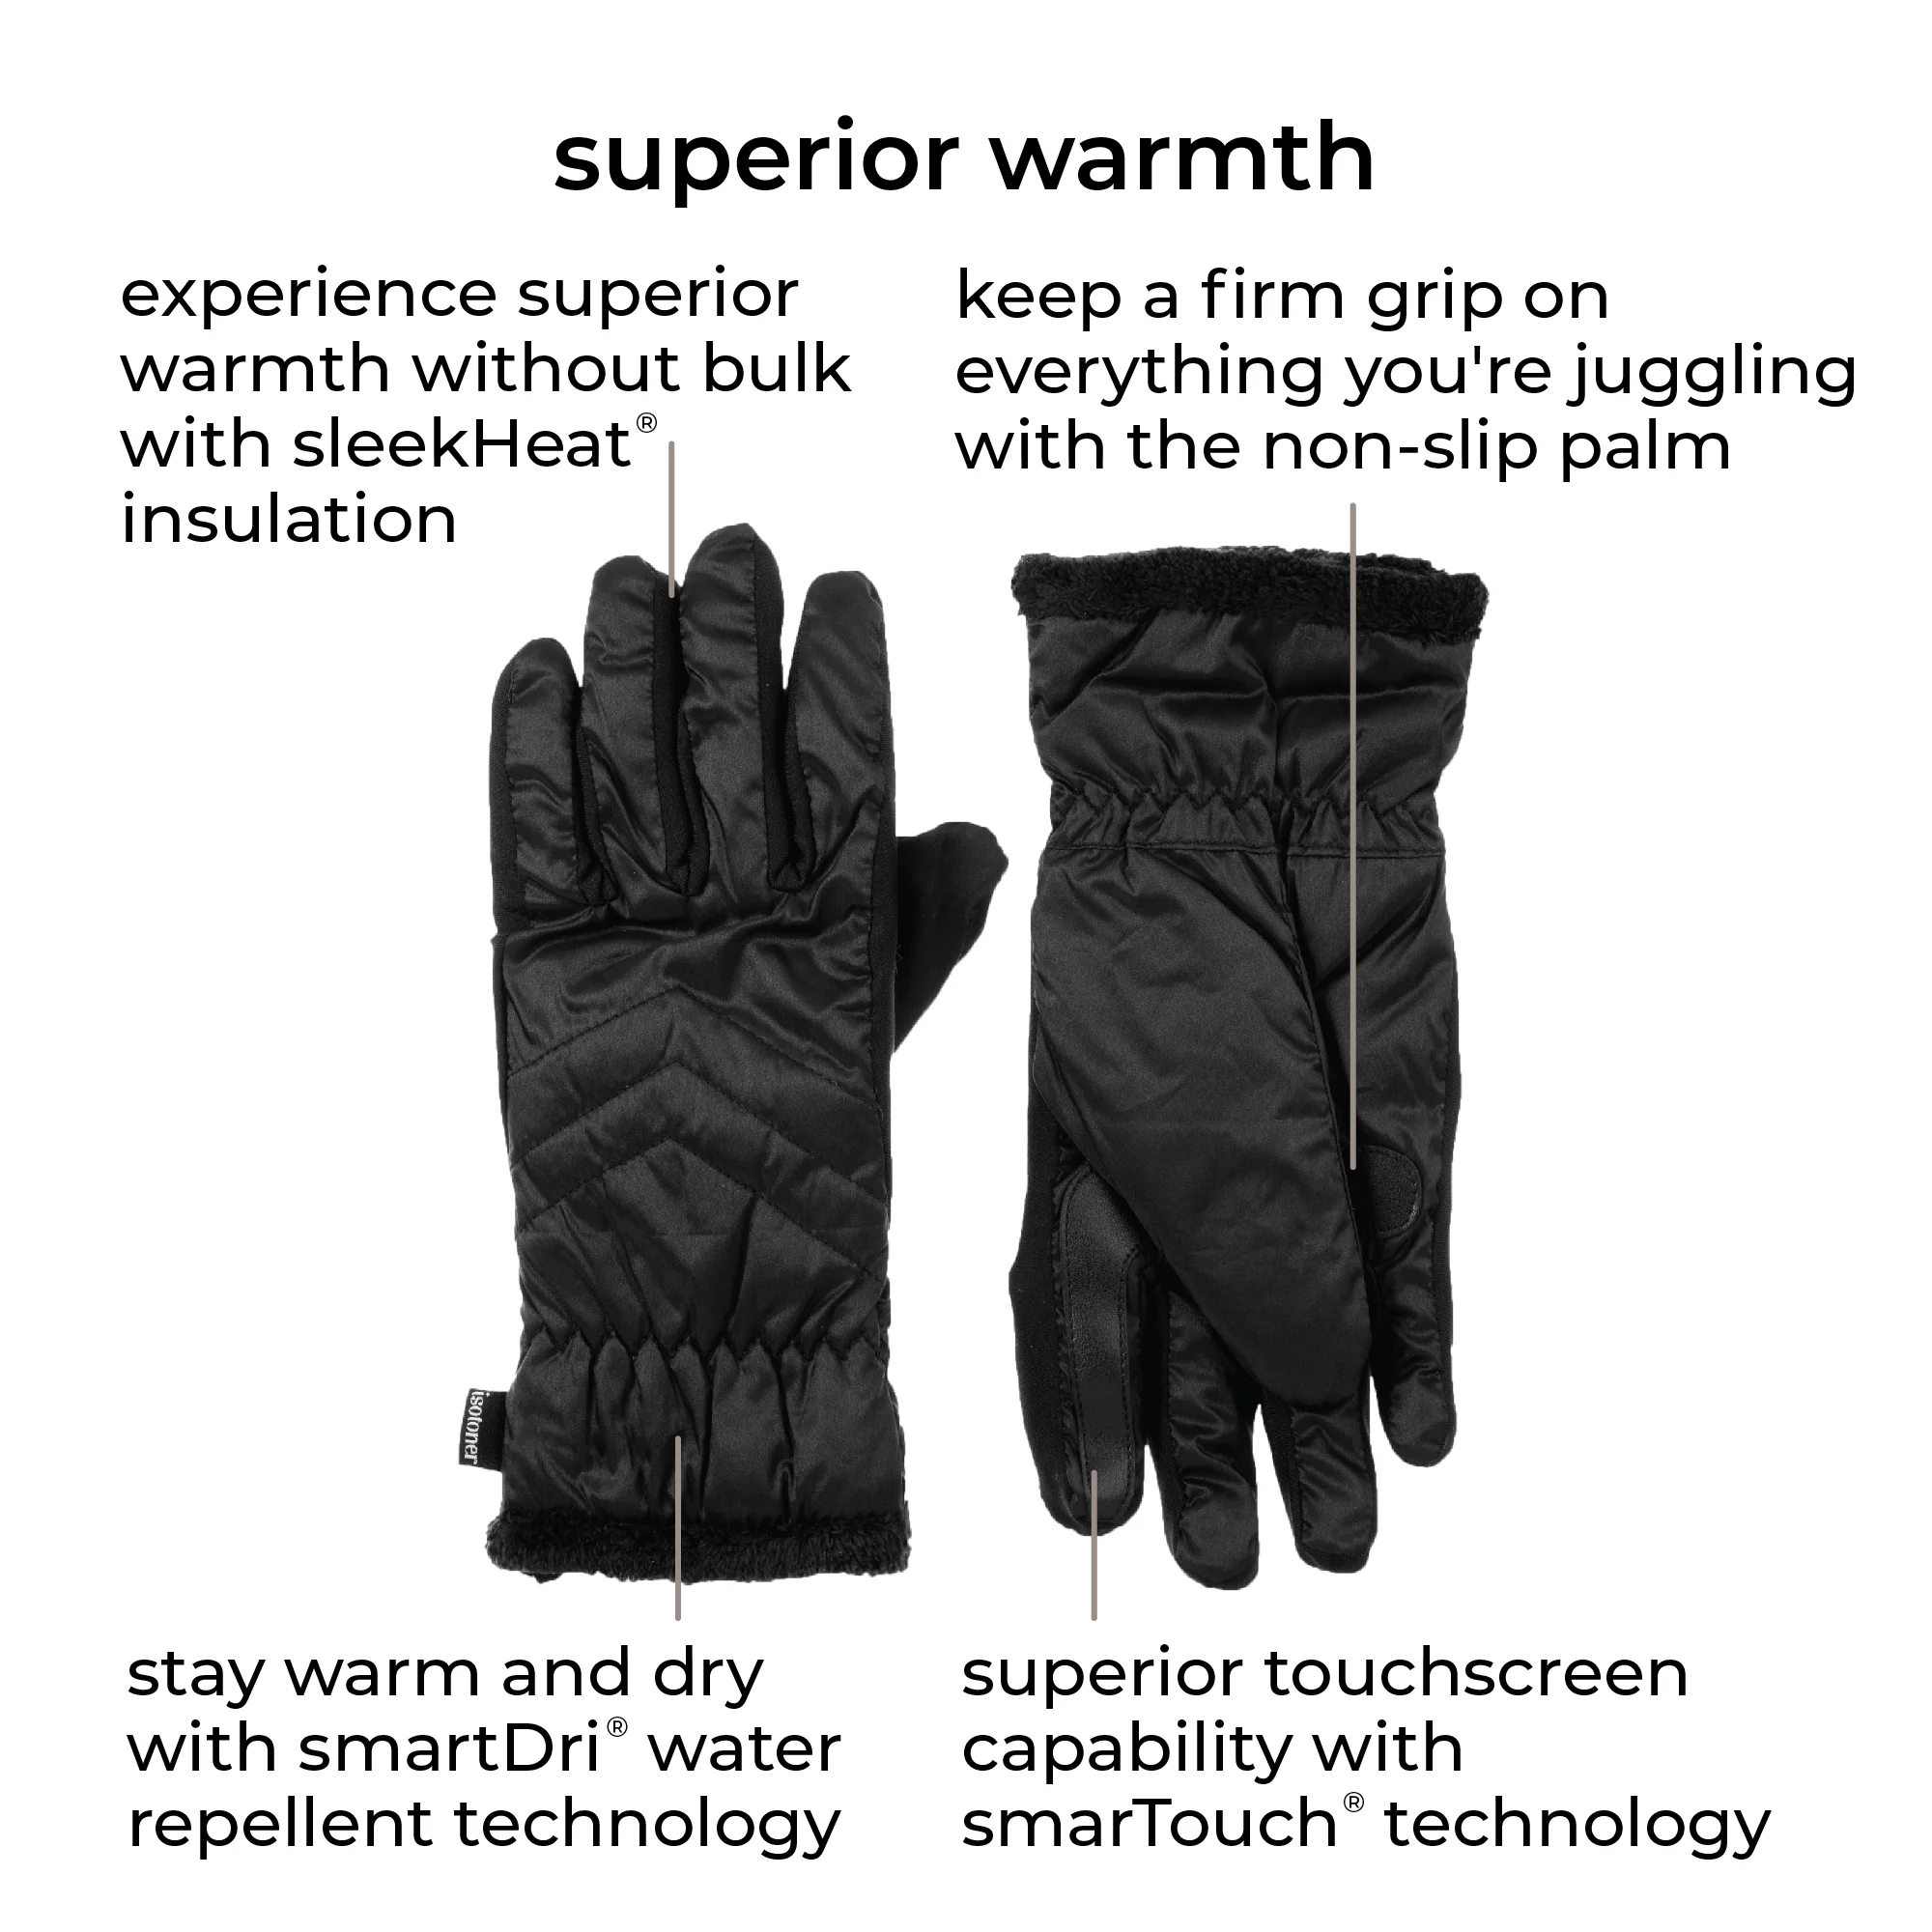 FIRM GRIP X-Large Winter Suede Leather Gloves with Insulated